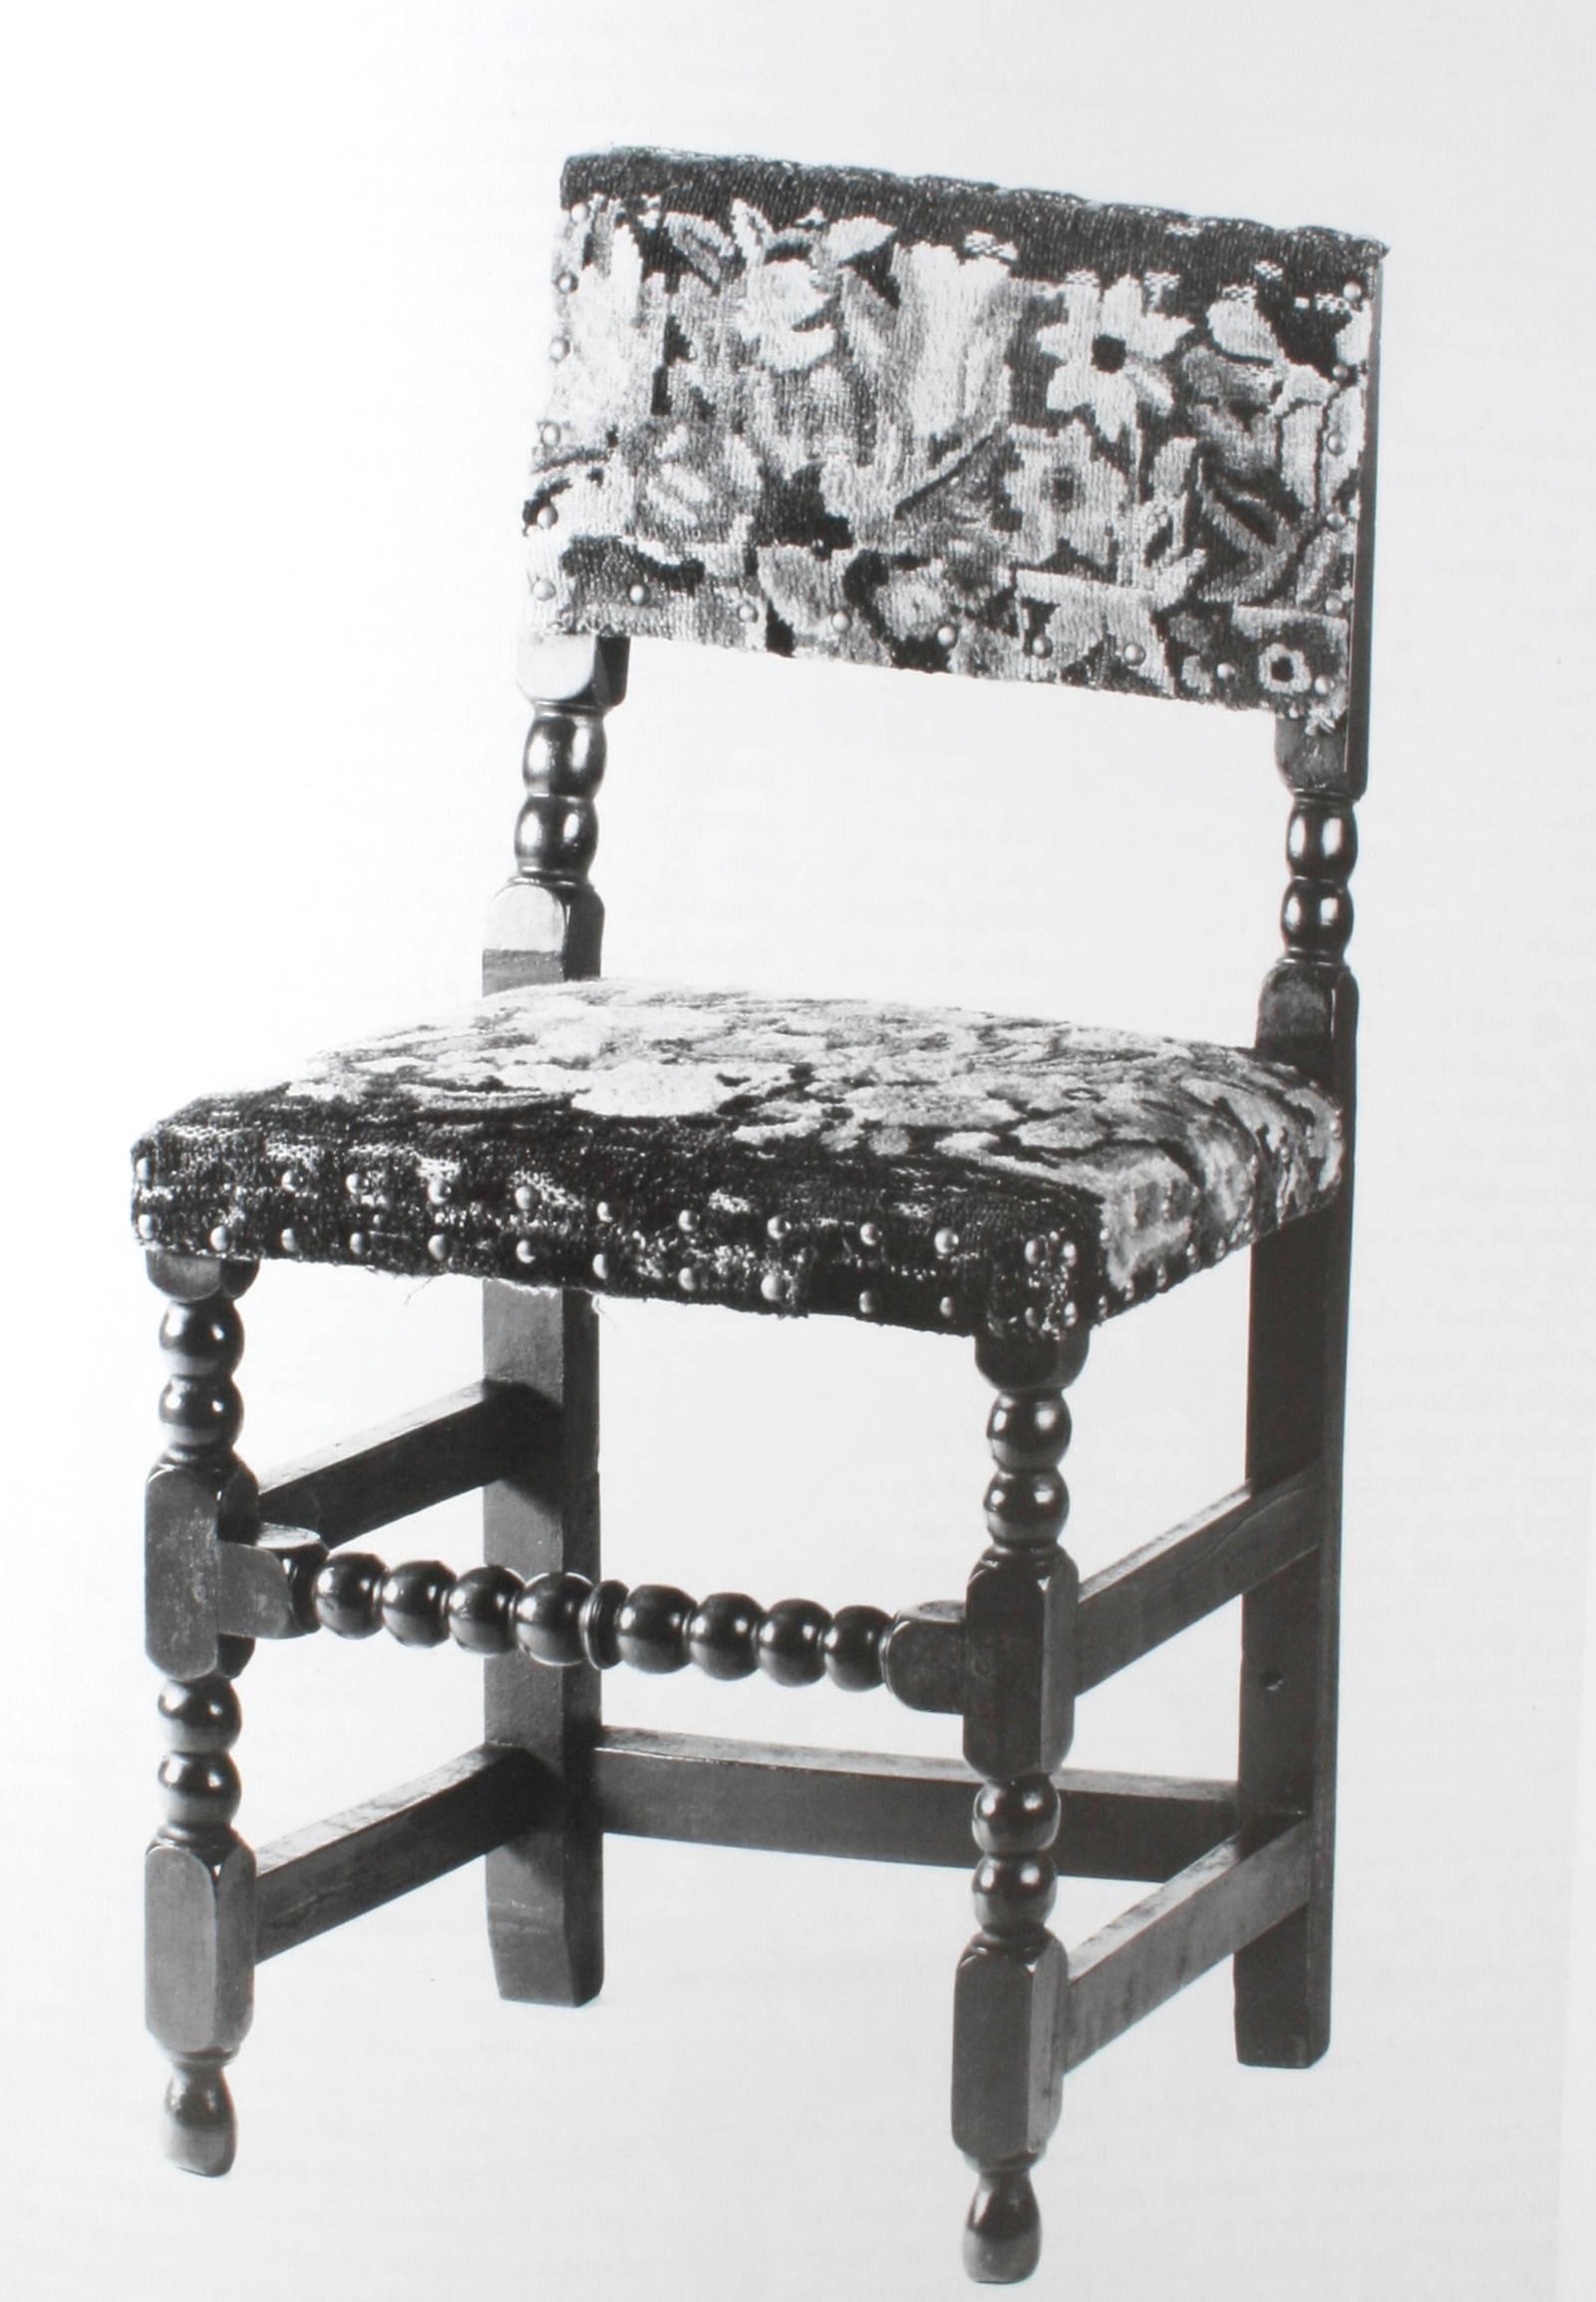 20th Century American Seating Furniture 1630-1730, First Edition For Sale